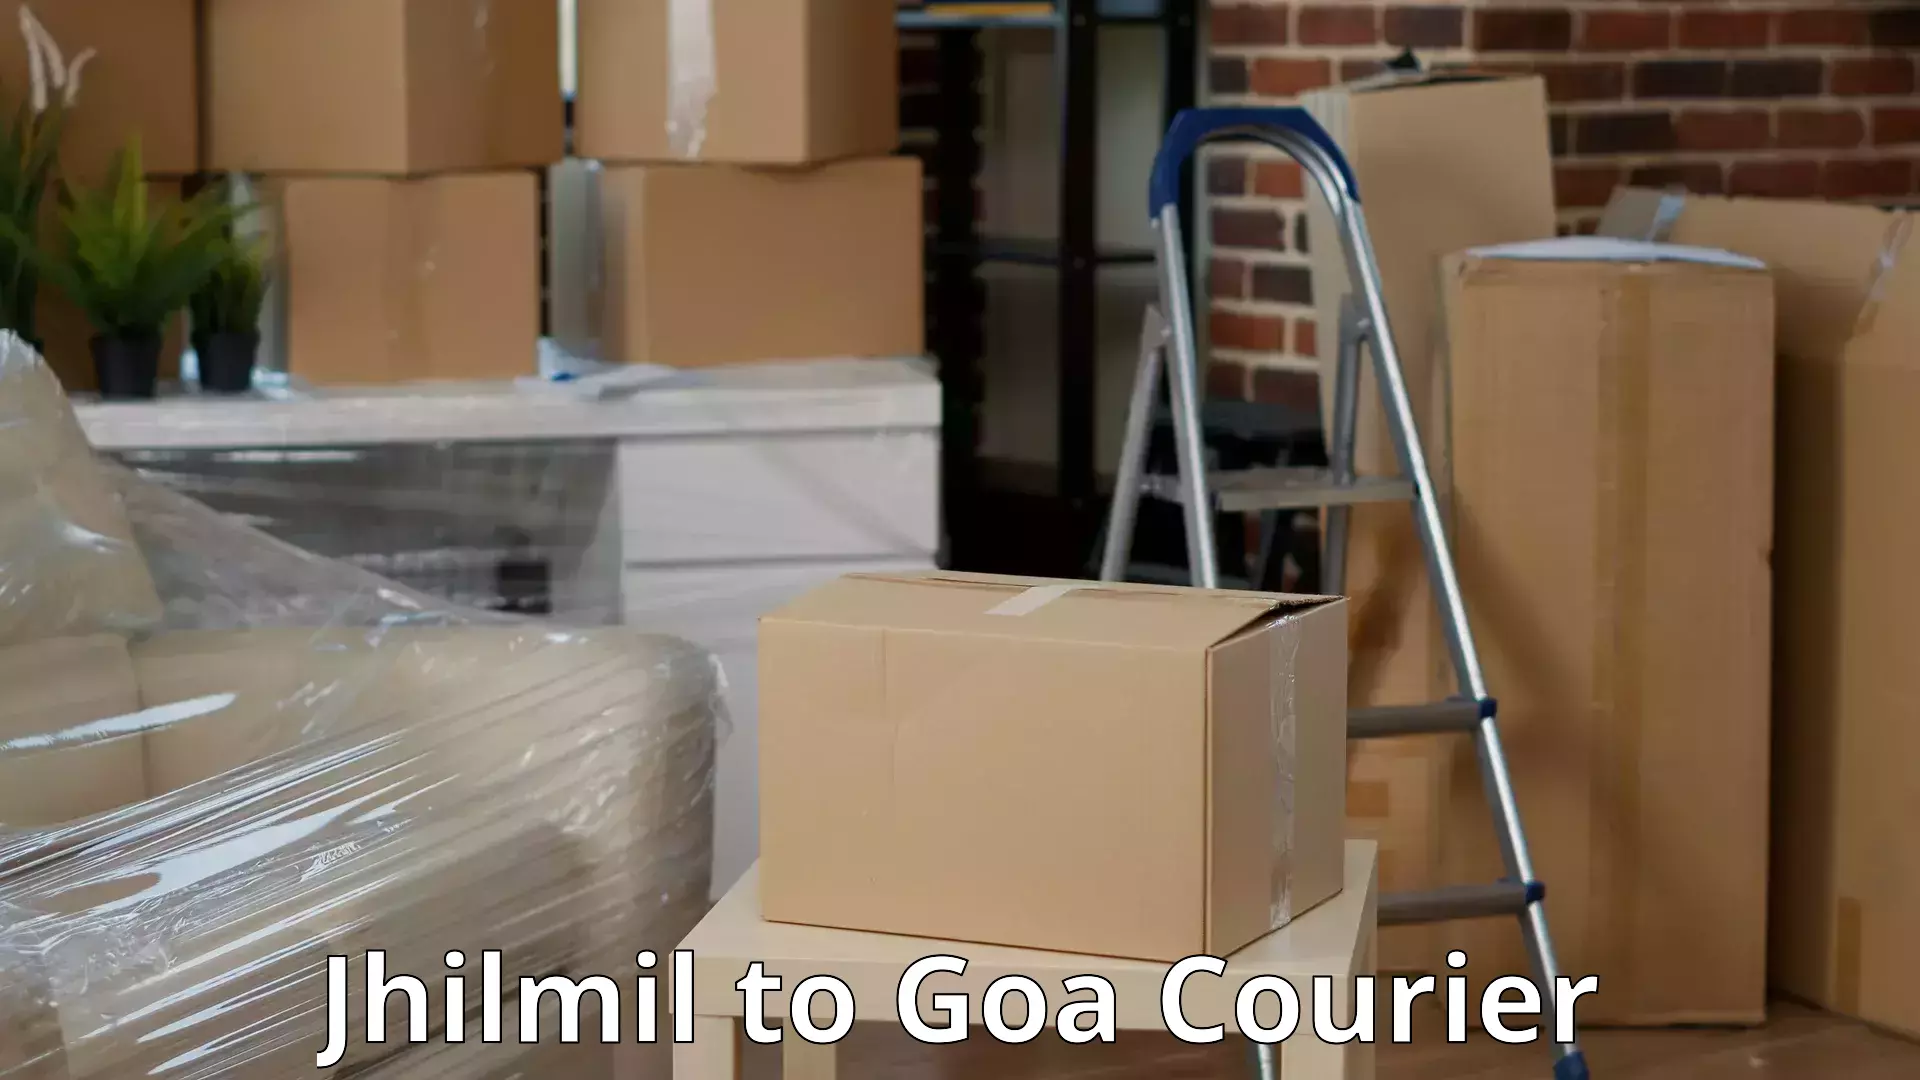 Moving and storage services Jhilmil to Goa